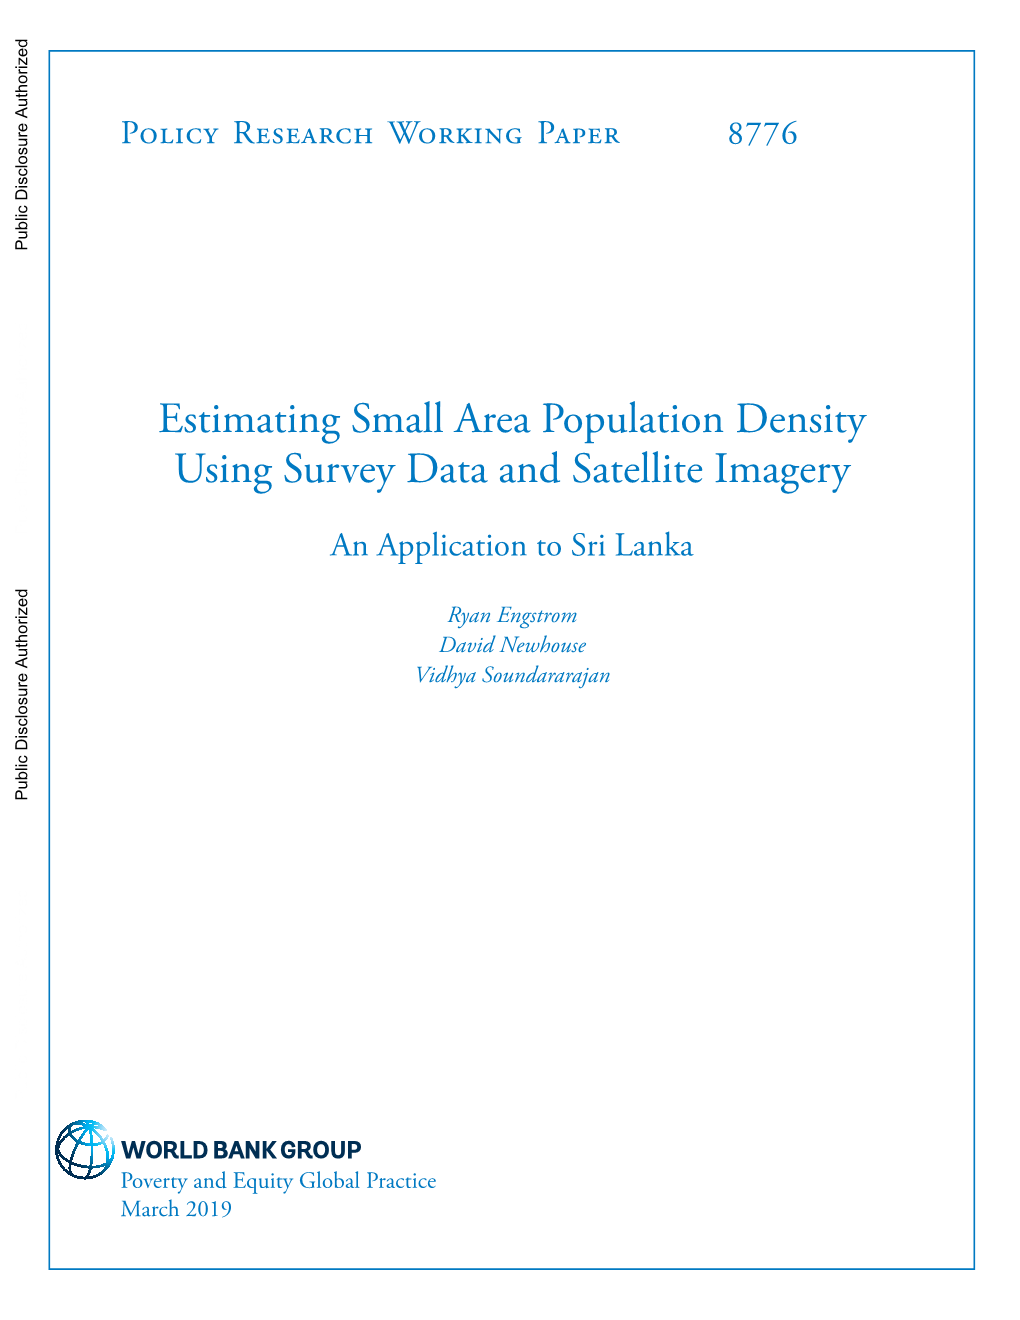 Estimating Small Area Population Density Using Survey Data and Satellite Imagery